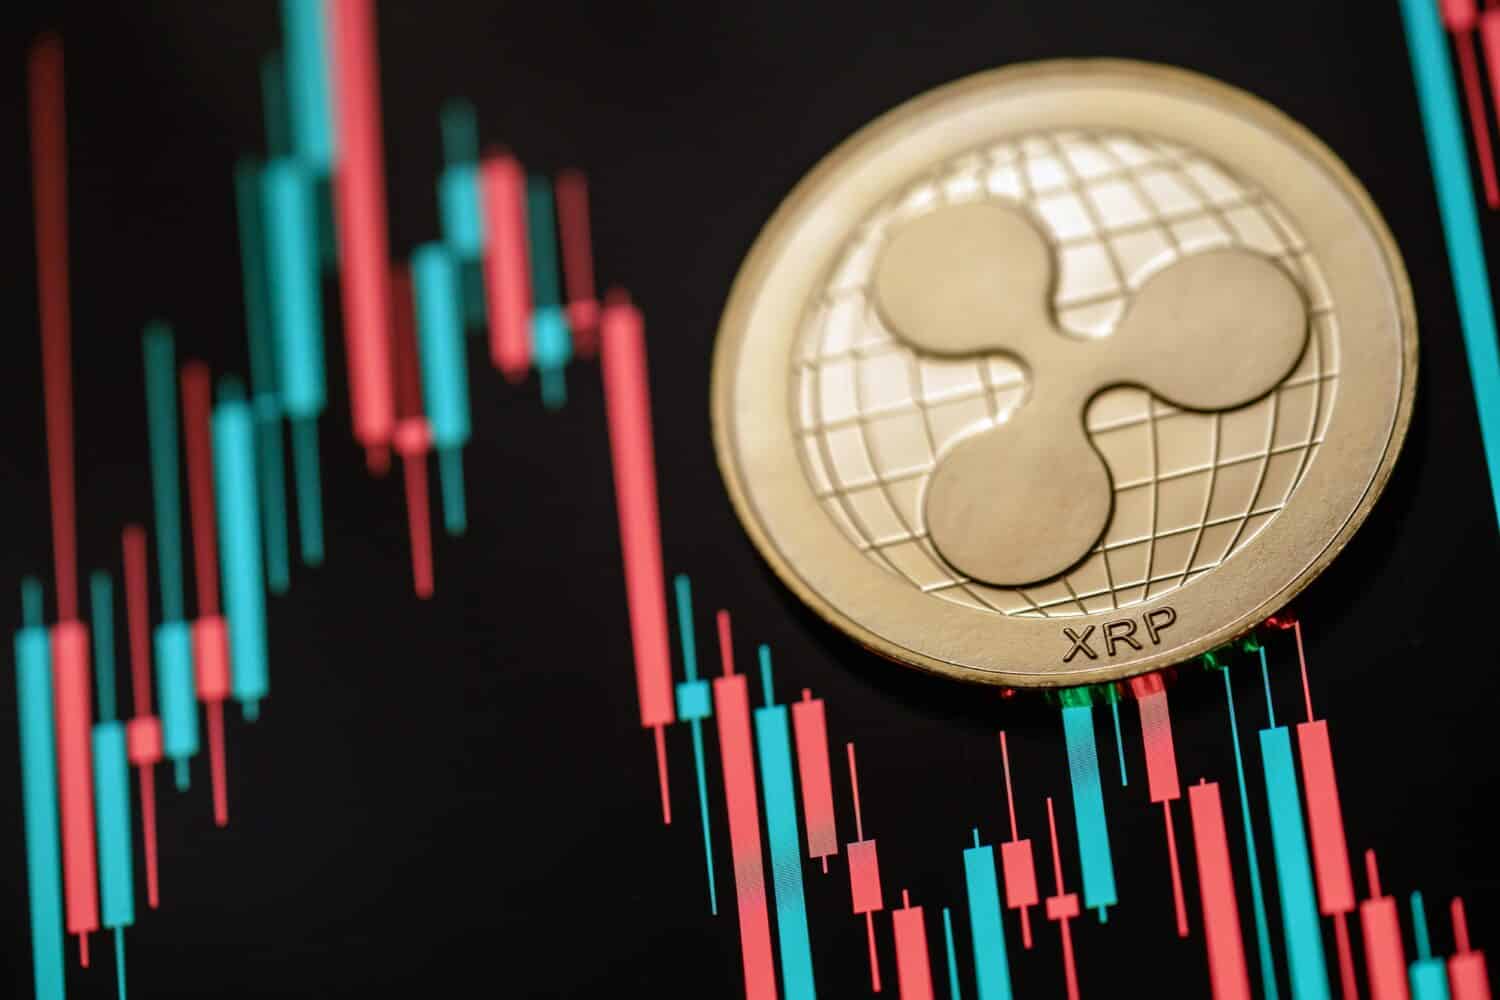 Gold Ripple (XRP) cryptocurrency with candle stick graph chart and digital background.